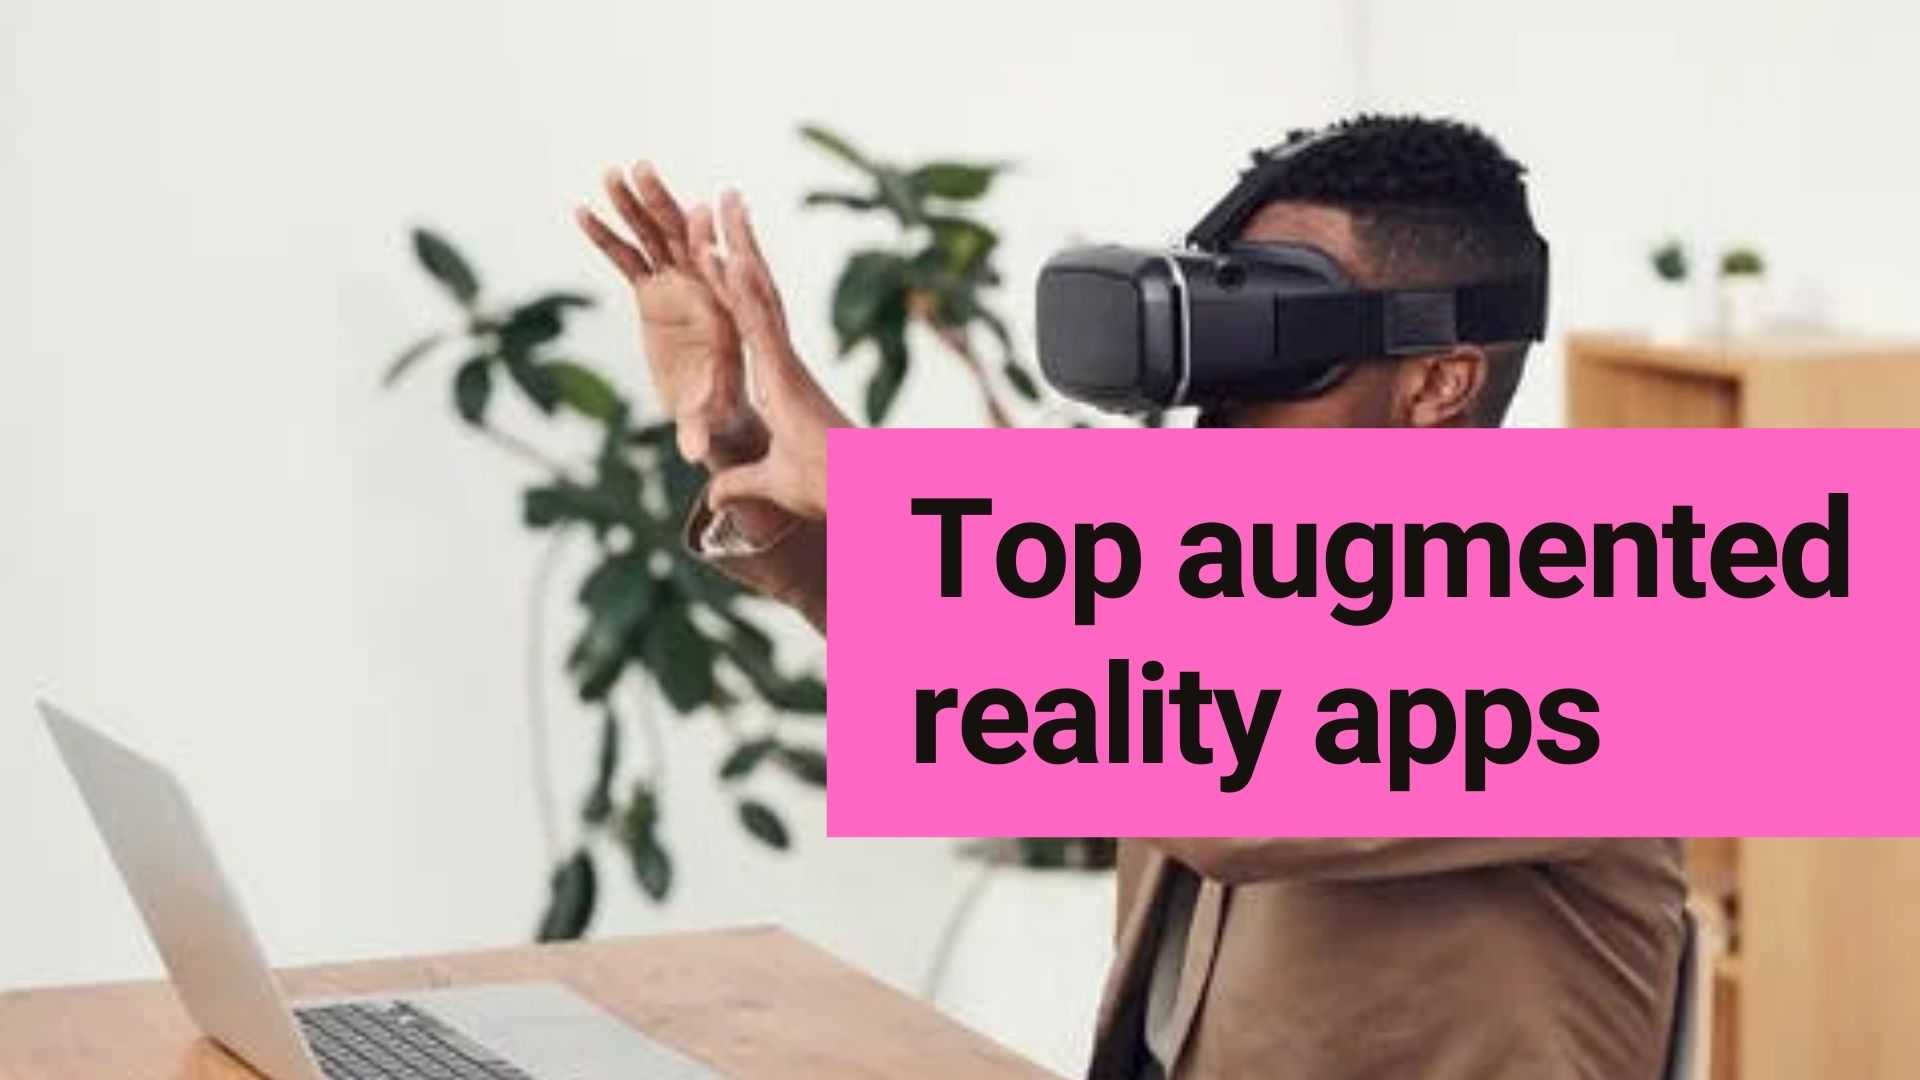 Top augmented reality apps